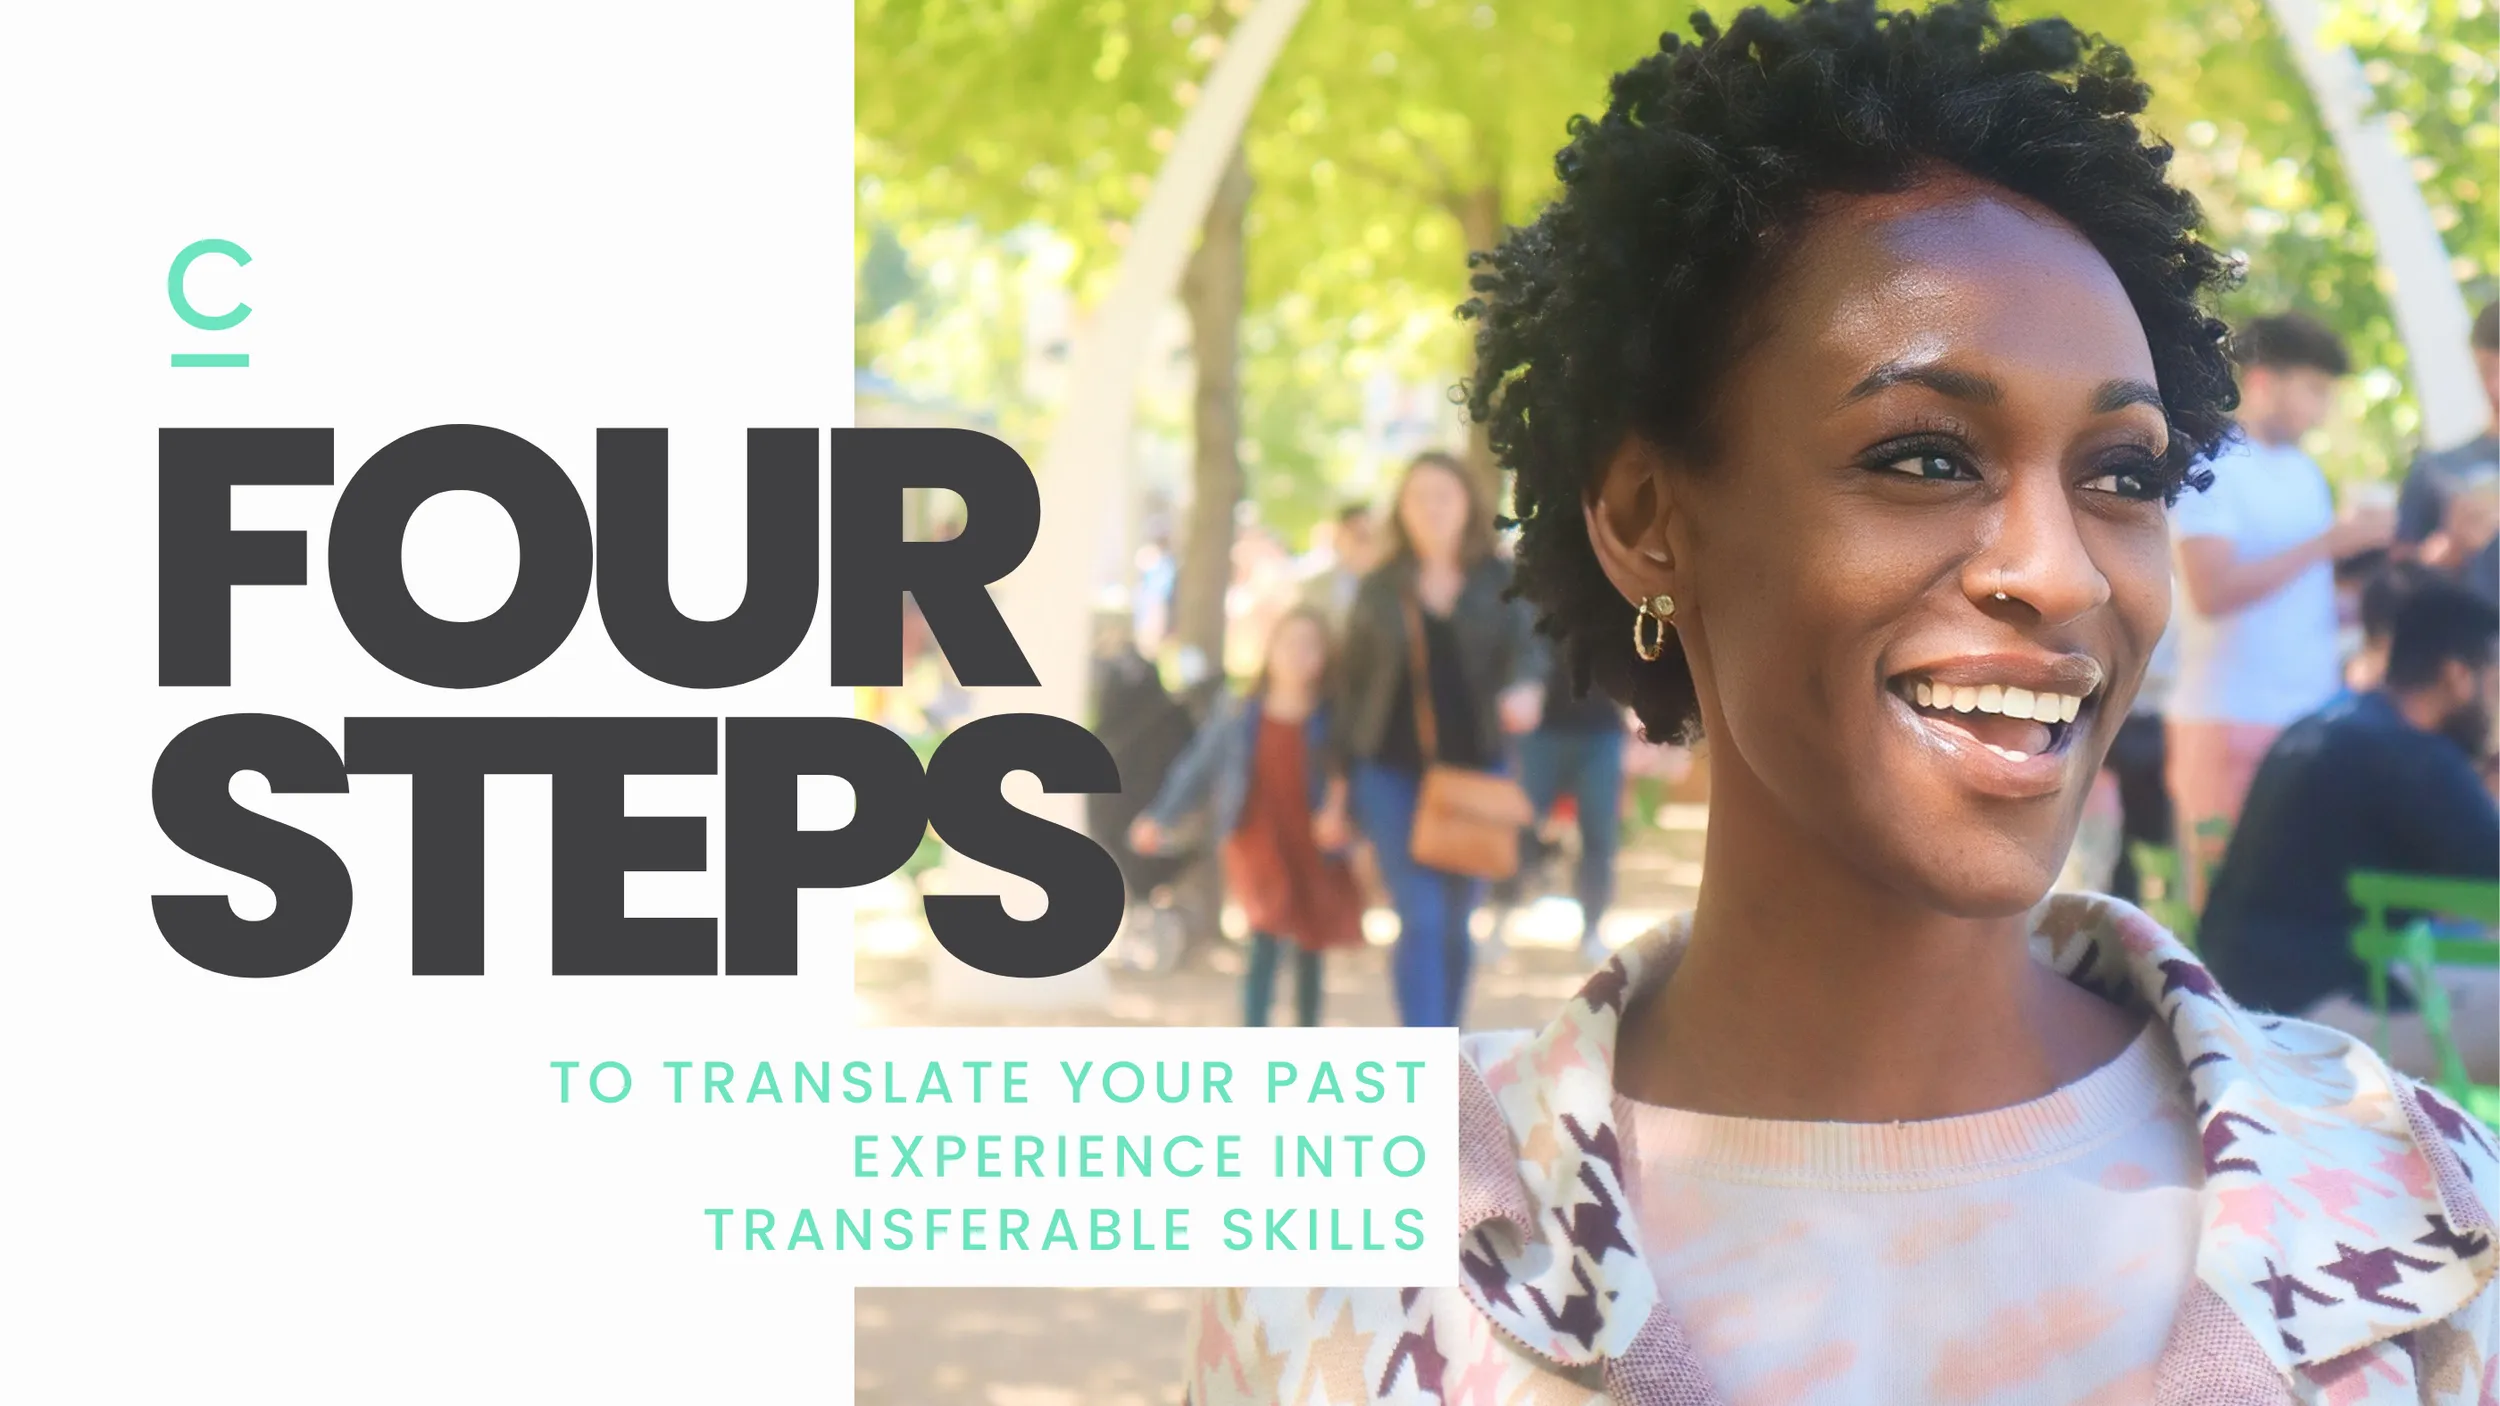 Four Step to translate your past experience into transferrable skills